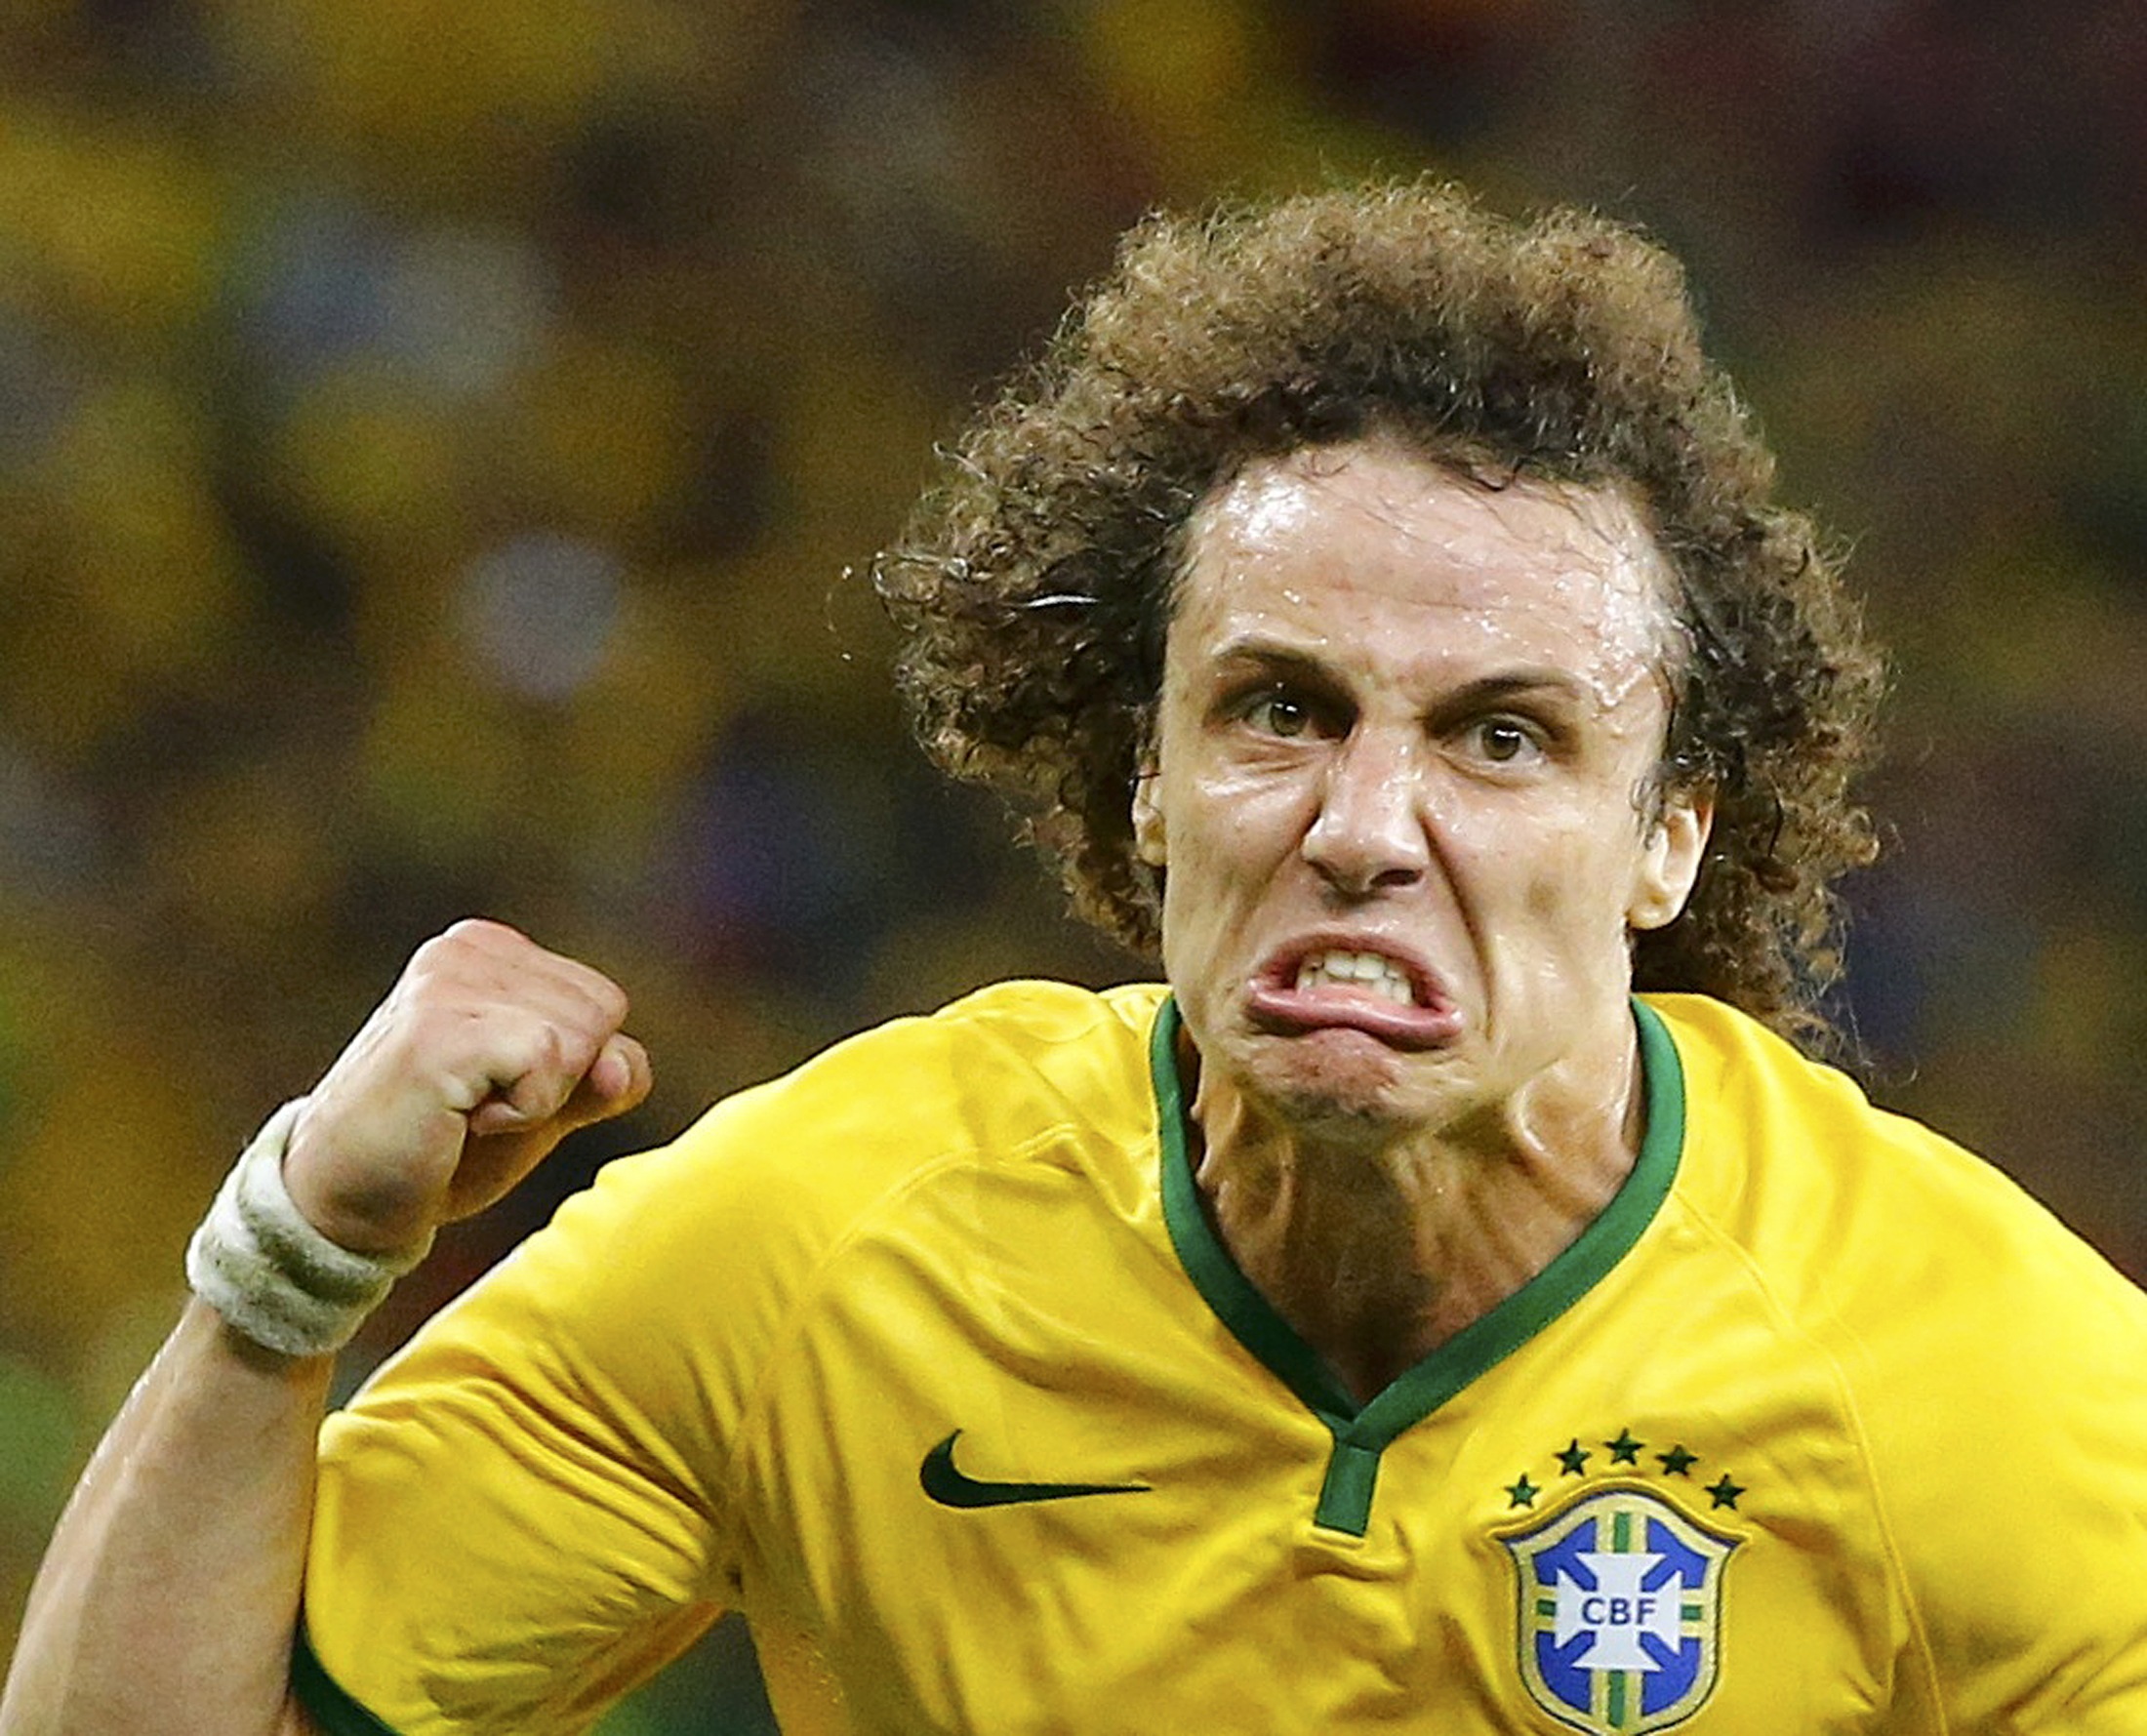 Brazil's David Luiz celebrates after scoring a goal against Colombia during the 2014 World Cup quarter-finals soccer match at the Castelao arena in Fortaleza July 4, 2014.      REUTERS/Stefano Rellandini (BRAZIL  - Tags: SOCCER SPORT WORLD CUP)  